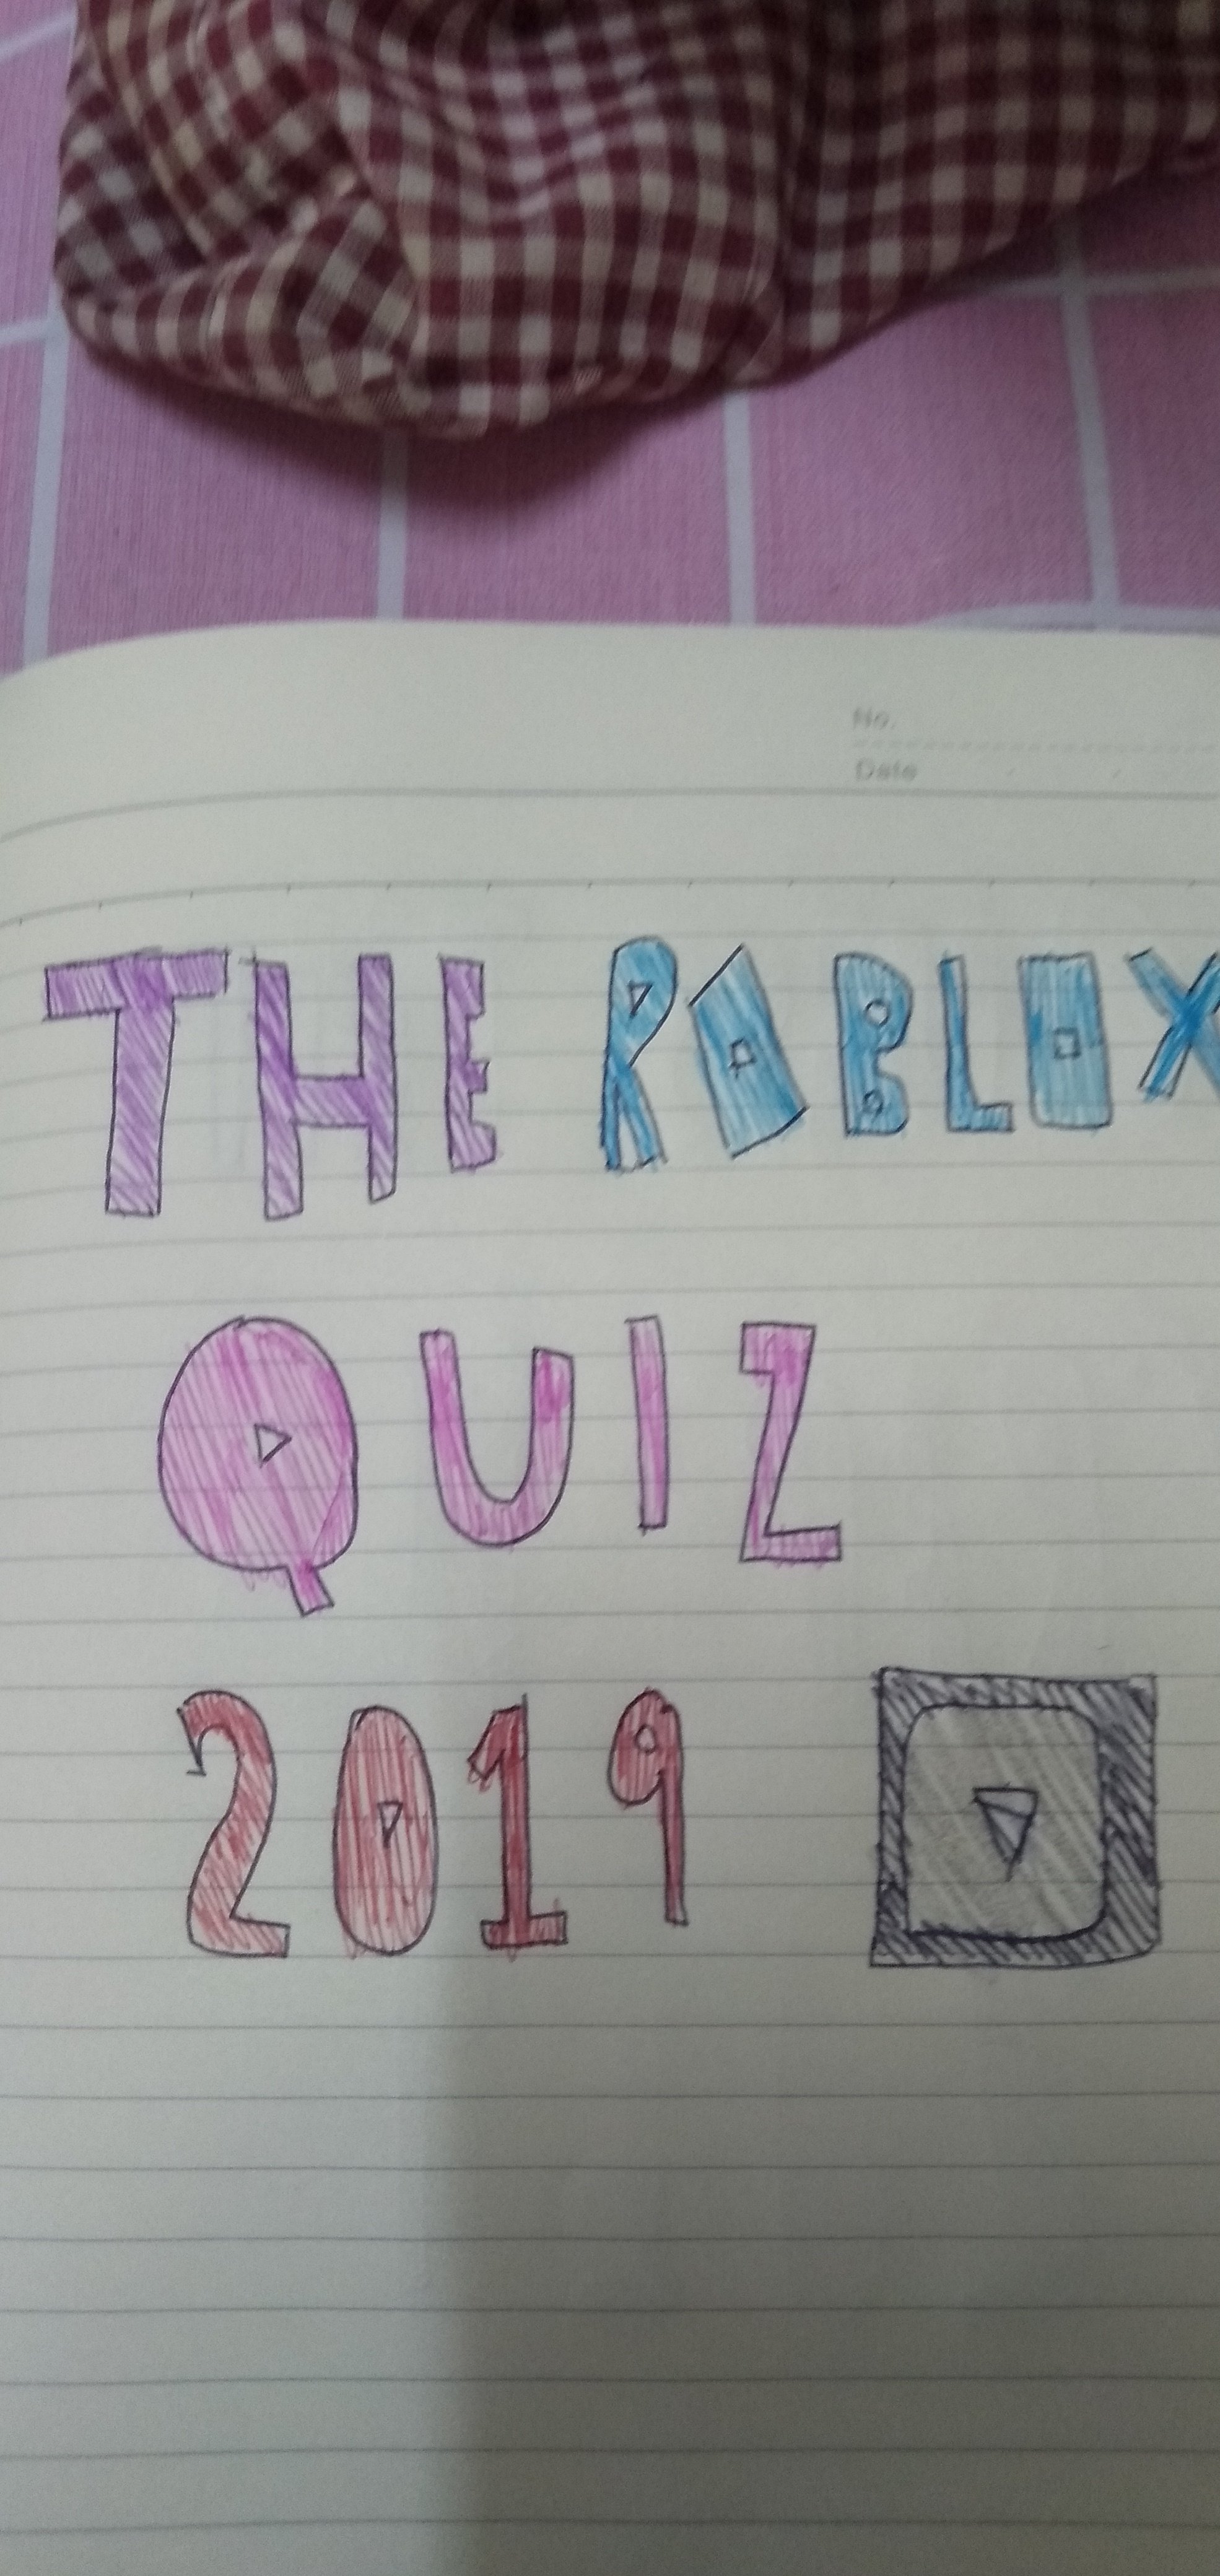 Who Developed Roblox Quiz Answers How To Get 6 Robux - roblox quiz diva